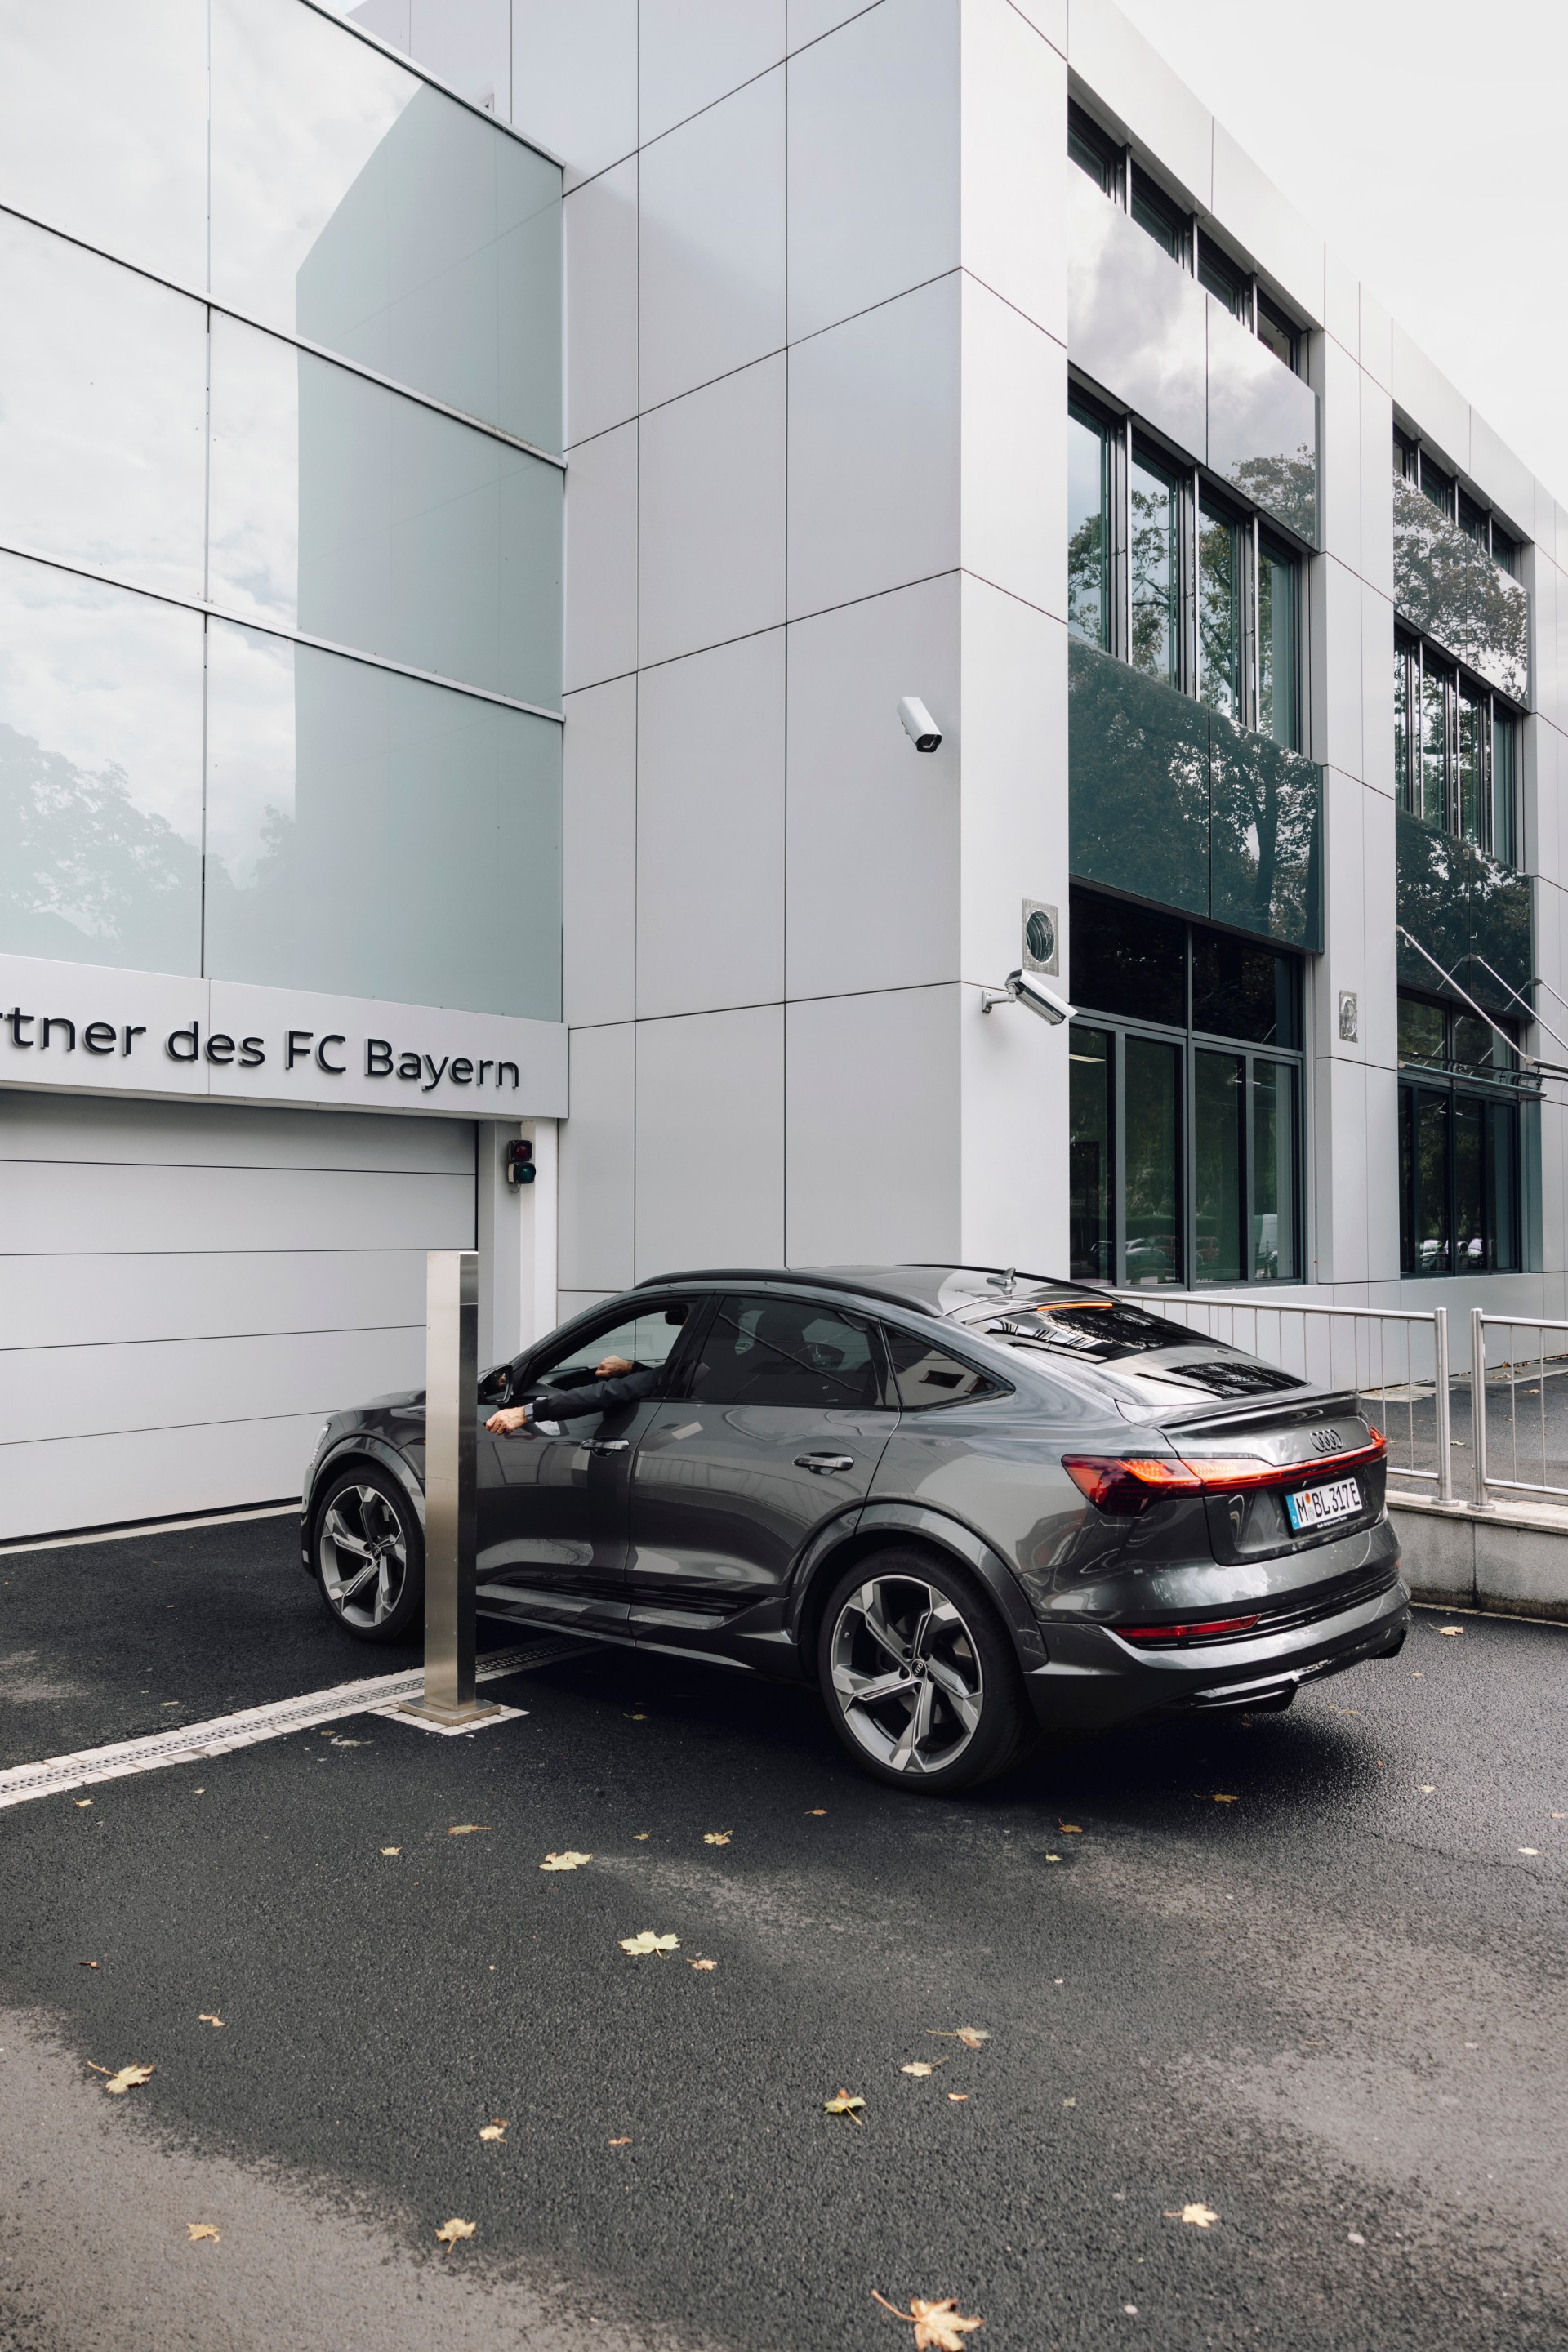 The Audi e-tron S Sportback is parked in front of the gate to the underground car park.